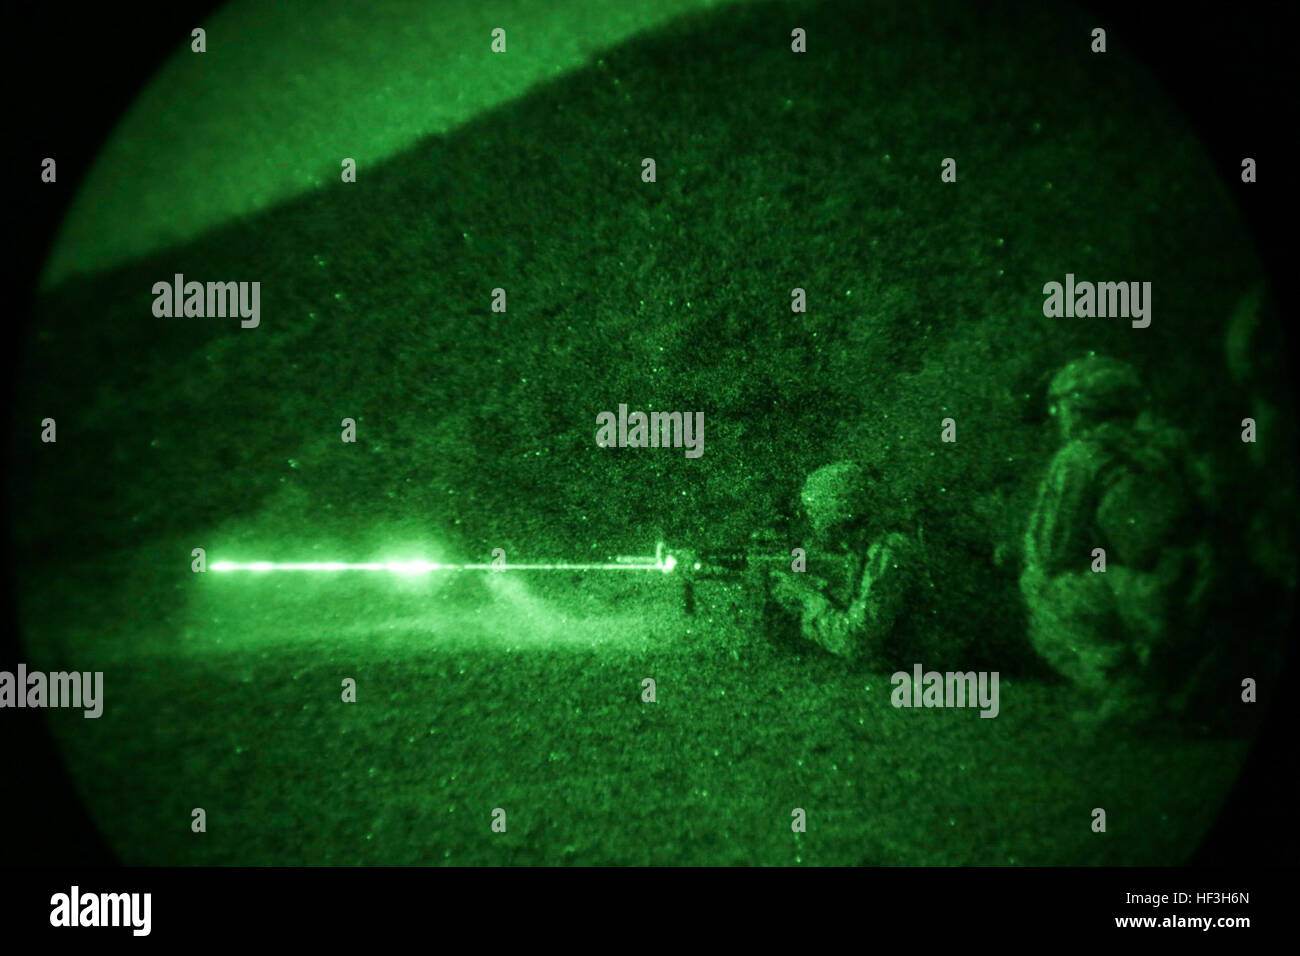 ARTA BEACH, Djibouti (July 22, 2015) A U.S. Marine with Battalion Landing Team 3rd Battalion, 1st Marine Regiment, 15th Marine Expeditionary Unit, fires an M4 Carbine during a night-fire exercise.  The Marines of BLT 3/1 executed a series of attack and maneuver drills consisting of, machine gun, squad and night attacks.  Elements of the 15th Marine Expeditionary Unit are ashore in Djibouti for sustainment training to maintain and enhance the skills they developed during their pre-deployment training period.  The 15th MEU is currently deployed in support of maritime security operations and thea Stock Photo